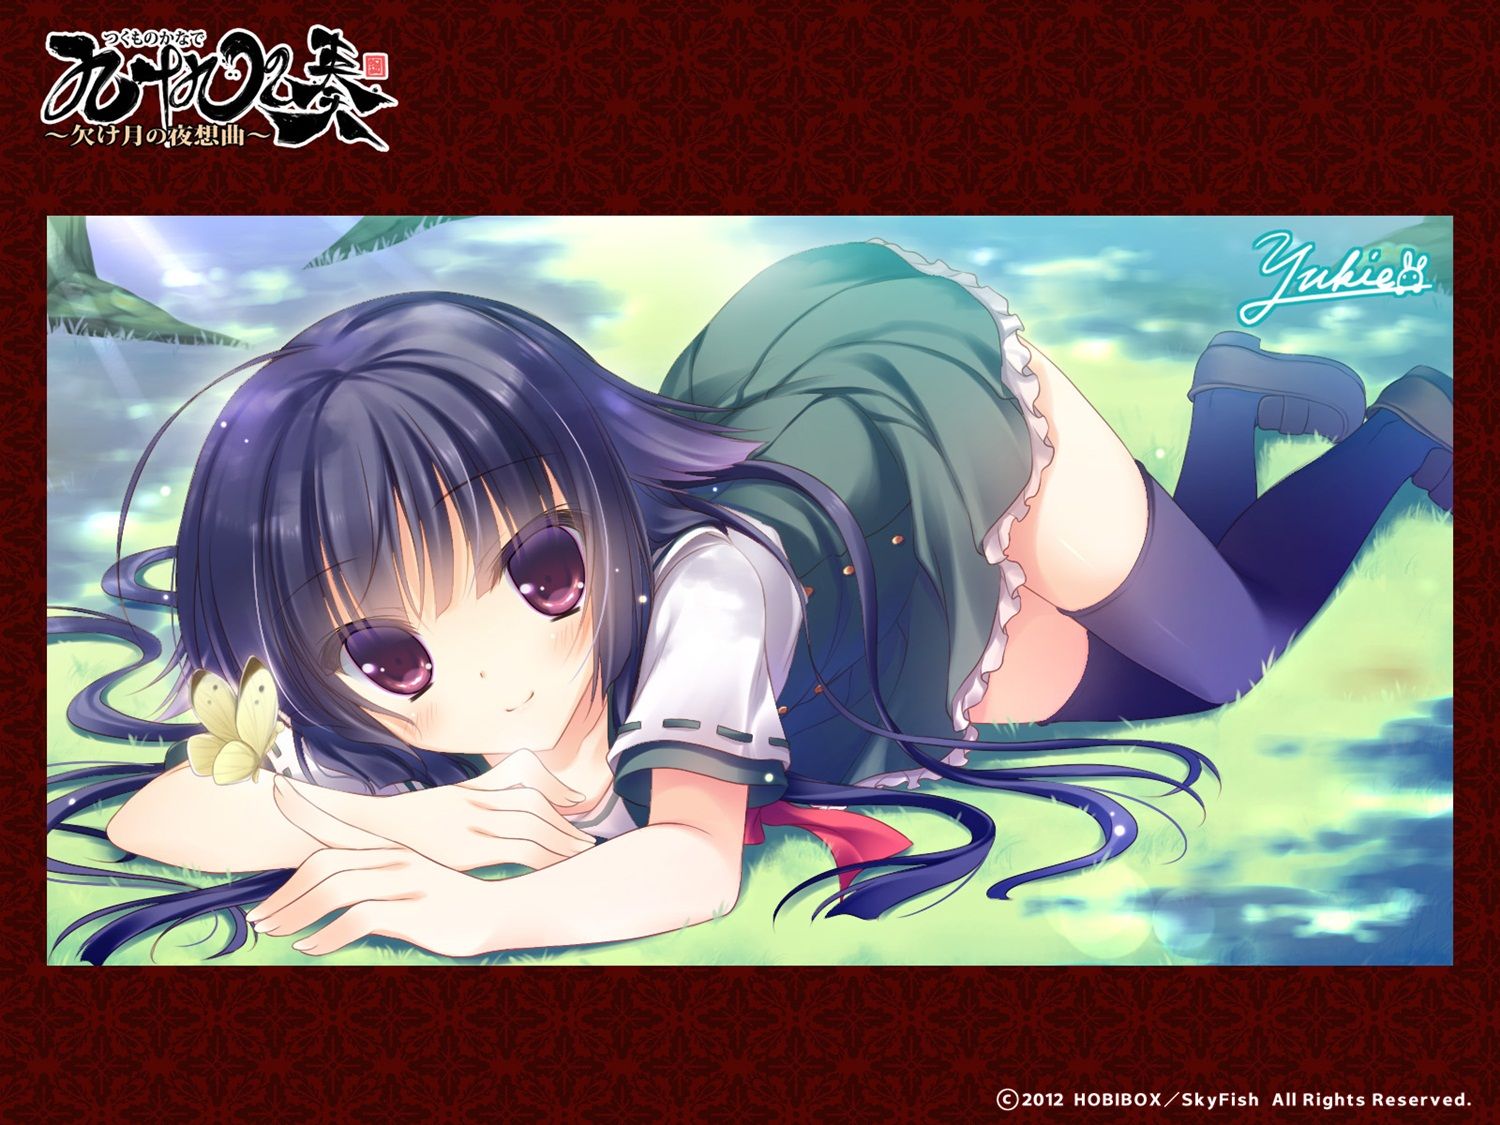 99 extravaganza [18 PC Bishoujo game CG] erotic wallpapers and pictures part 1 3